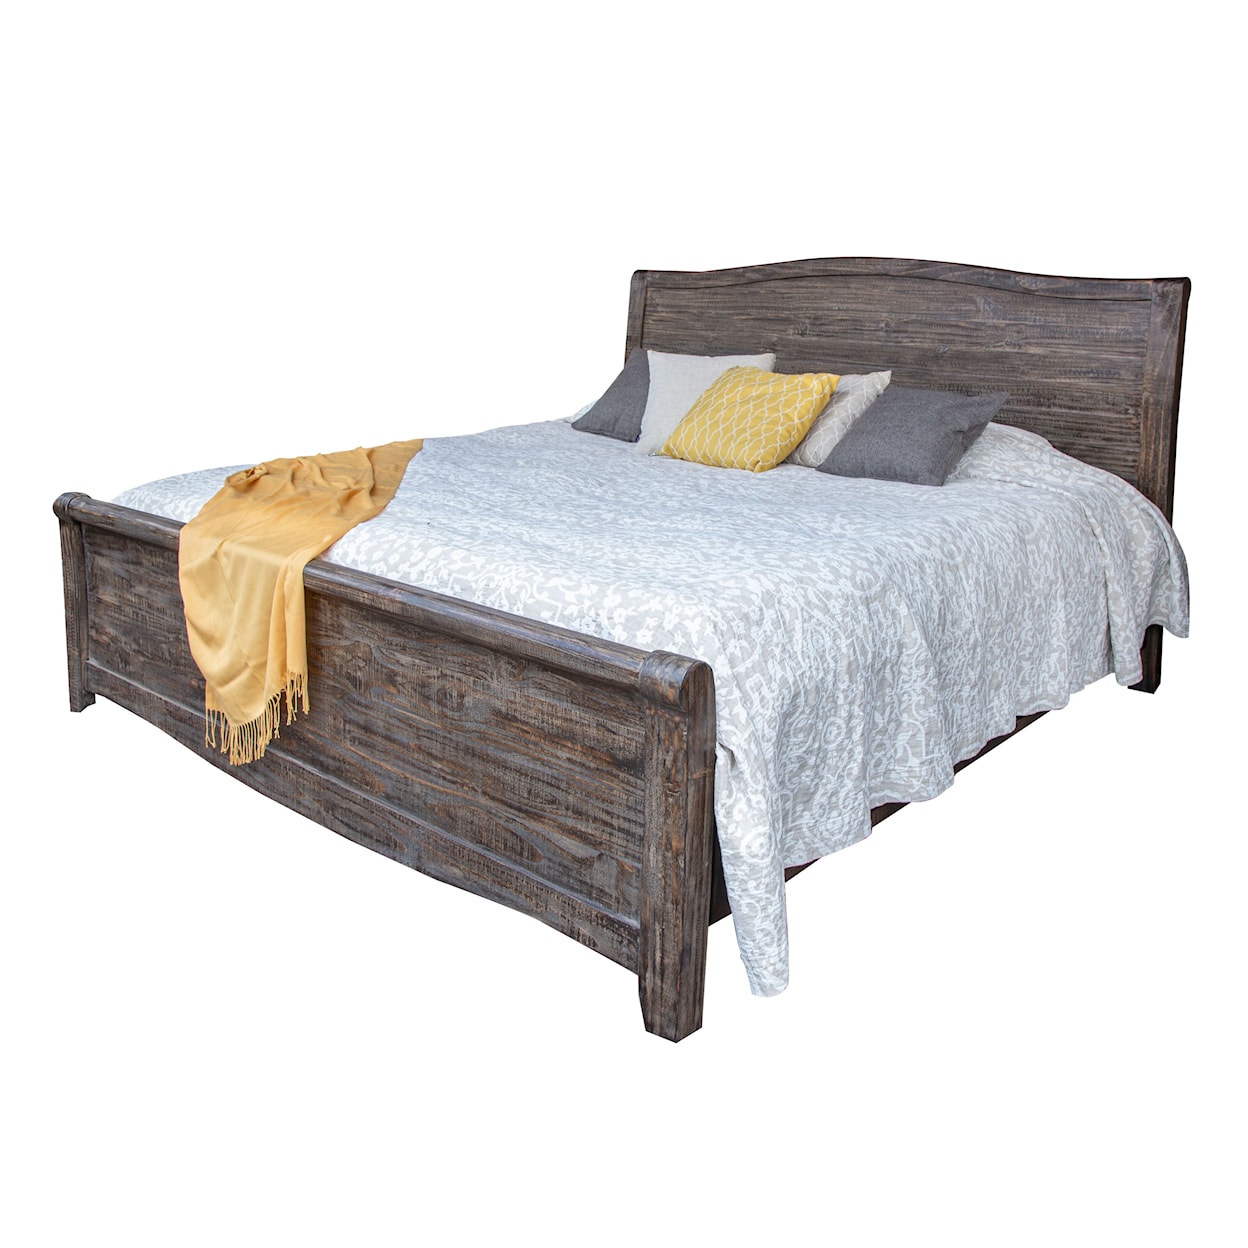 VFM Signature Nogales Bedroom Collection King Bed